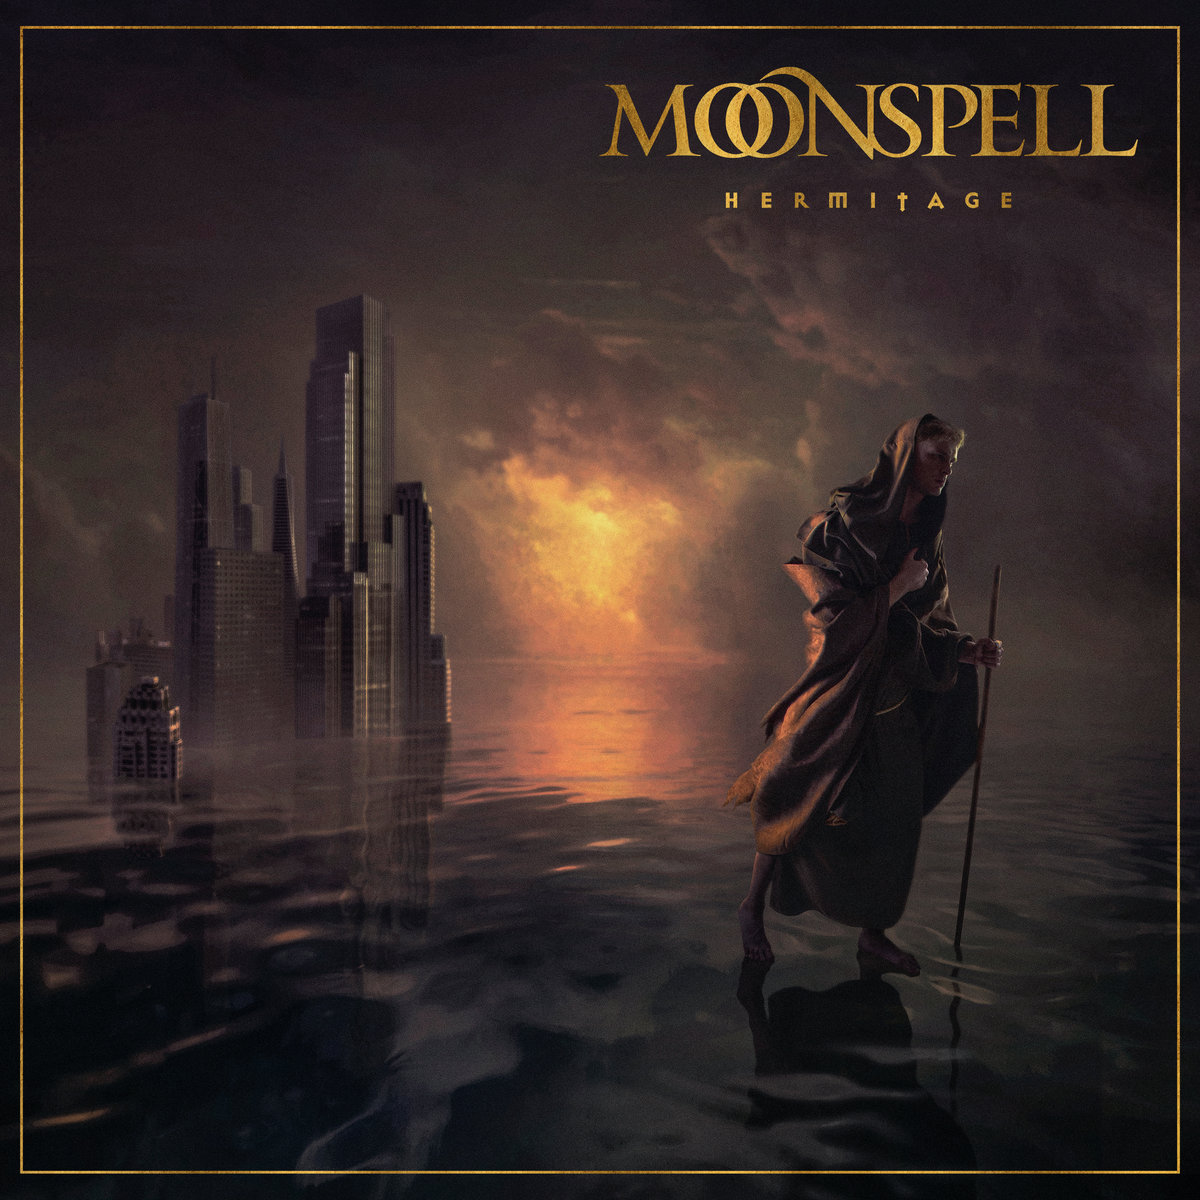 Moonspell – Hermitage Review